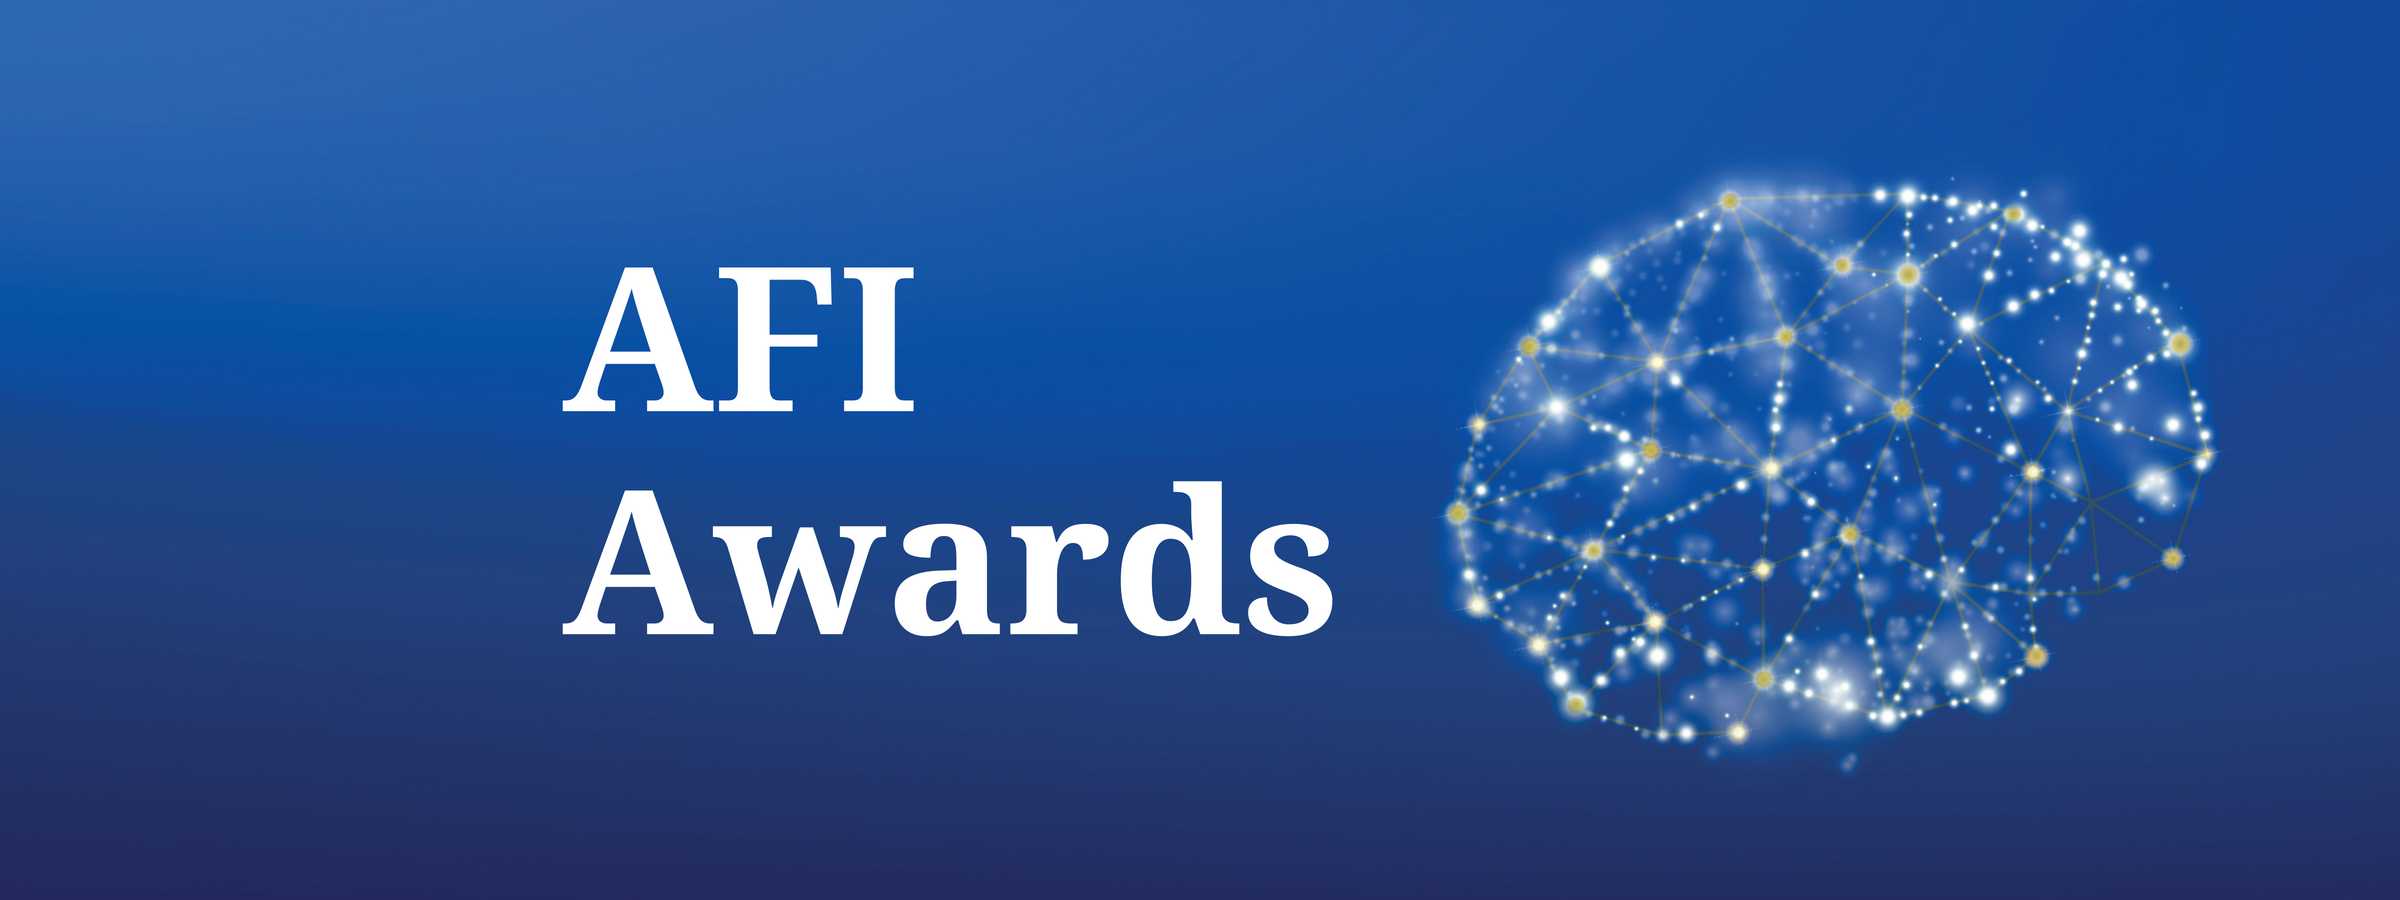 AFI Awards Alliance for Financial Inclusion Bringing smart policies